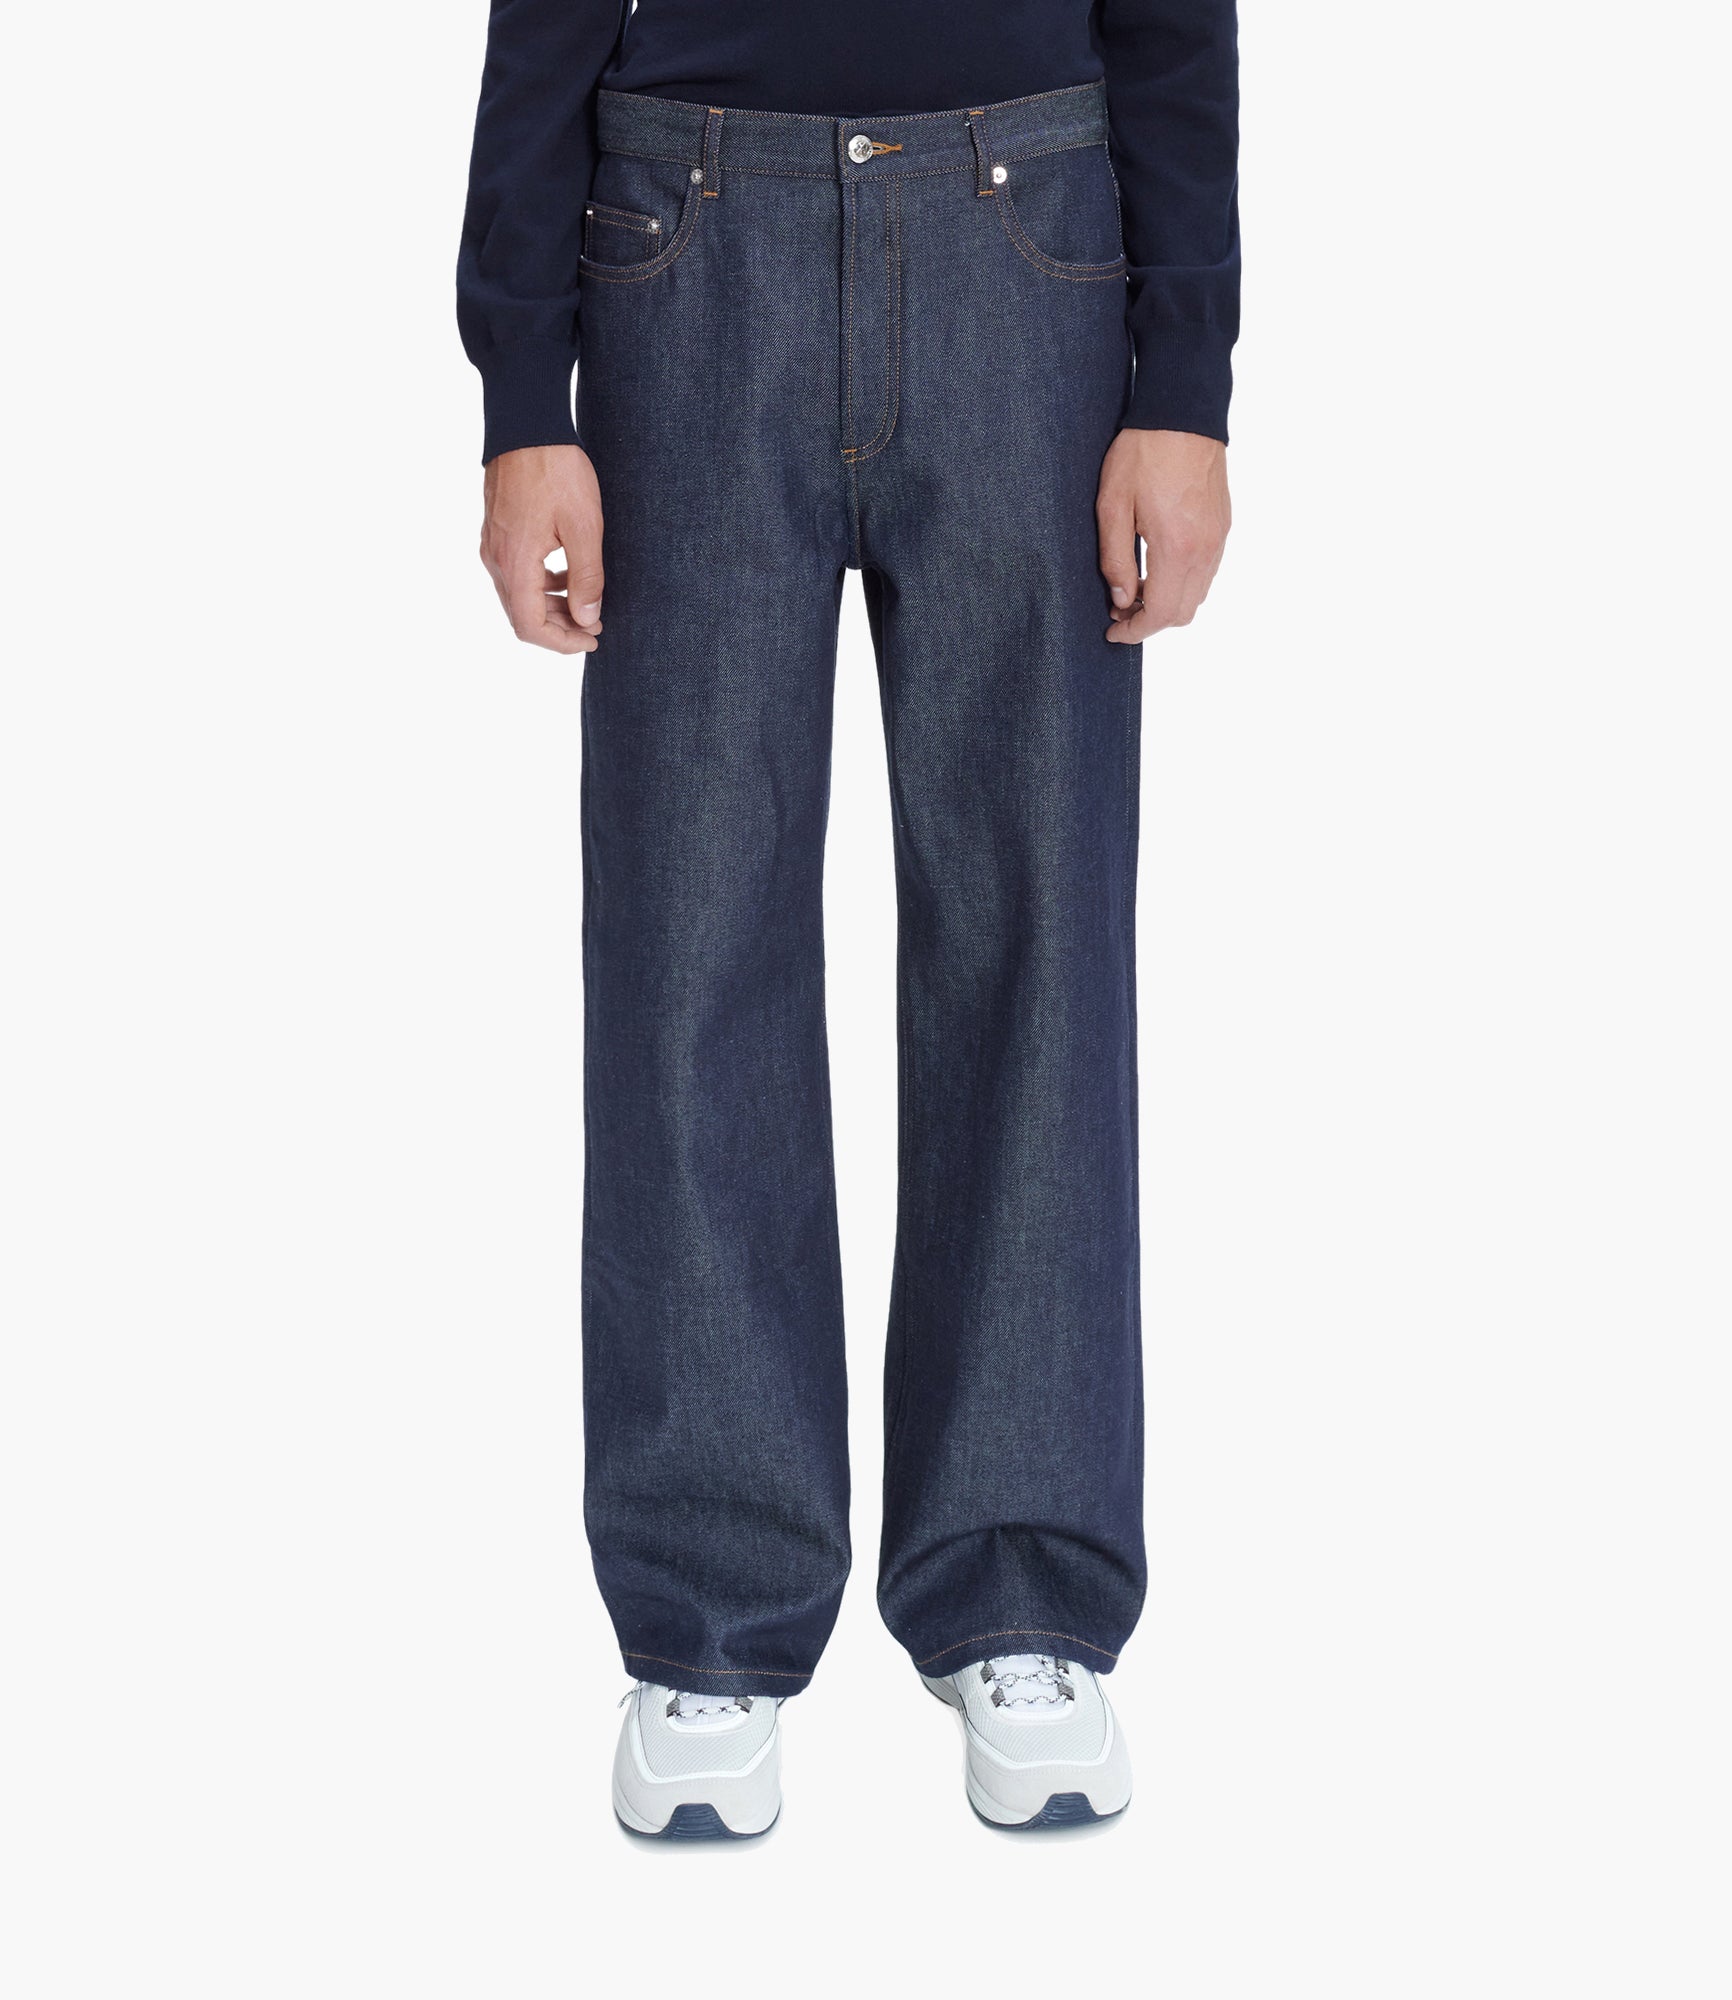 A.P.C. Men's Jeans - Skinny, Straight, Relaxed & More | Ready-to-Wear